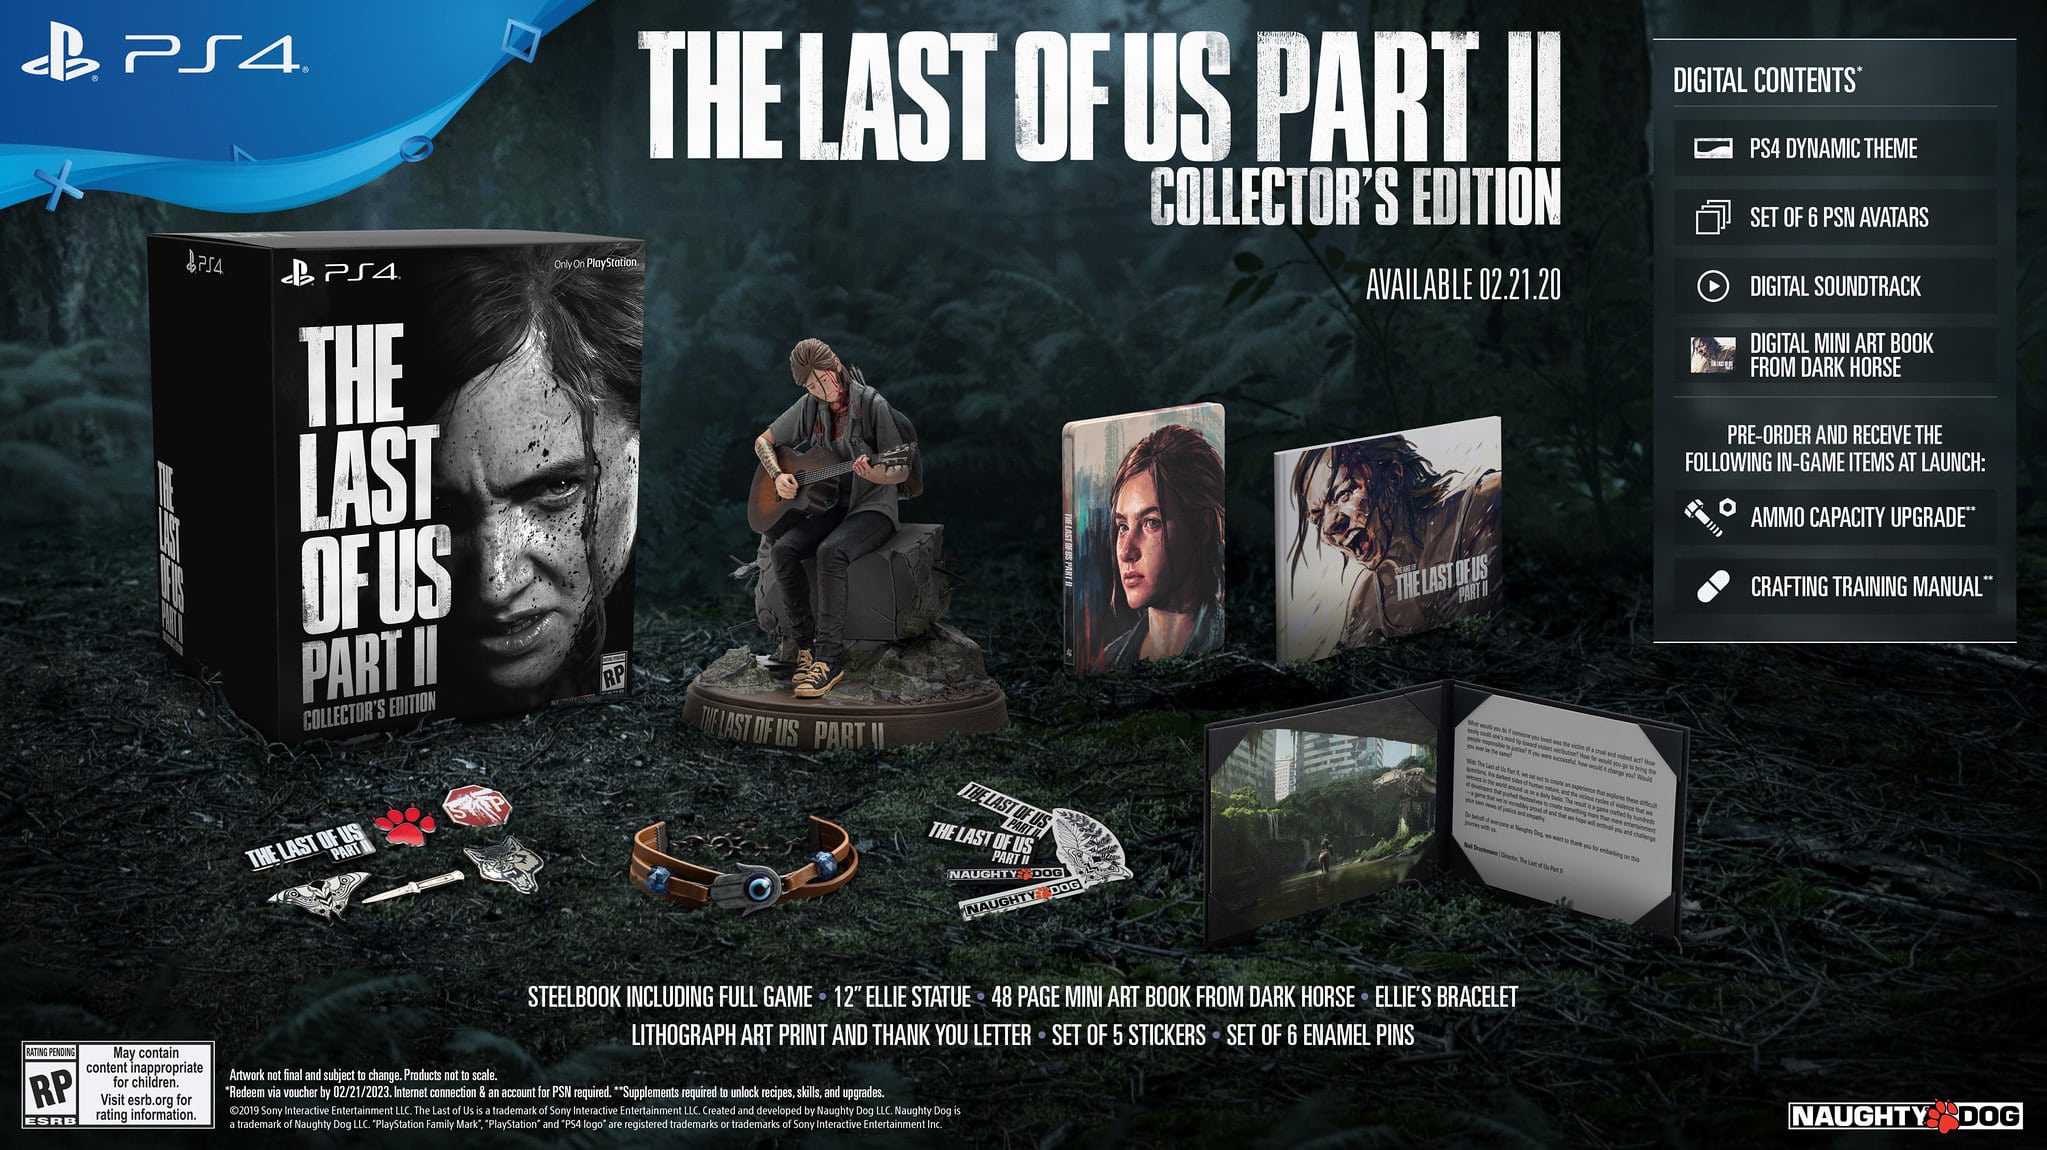 The last of us : part ii collector edition